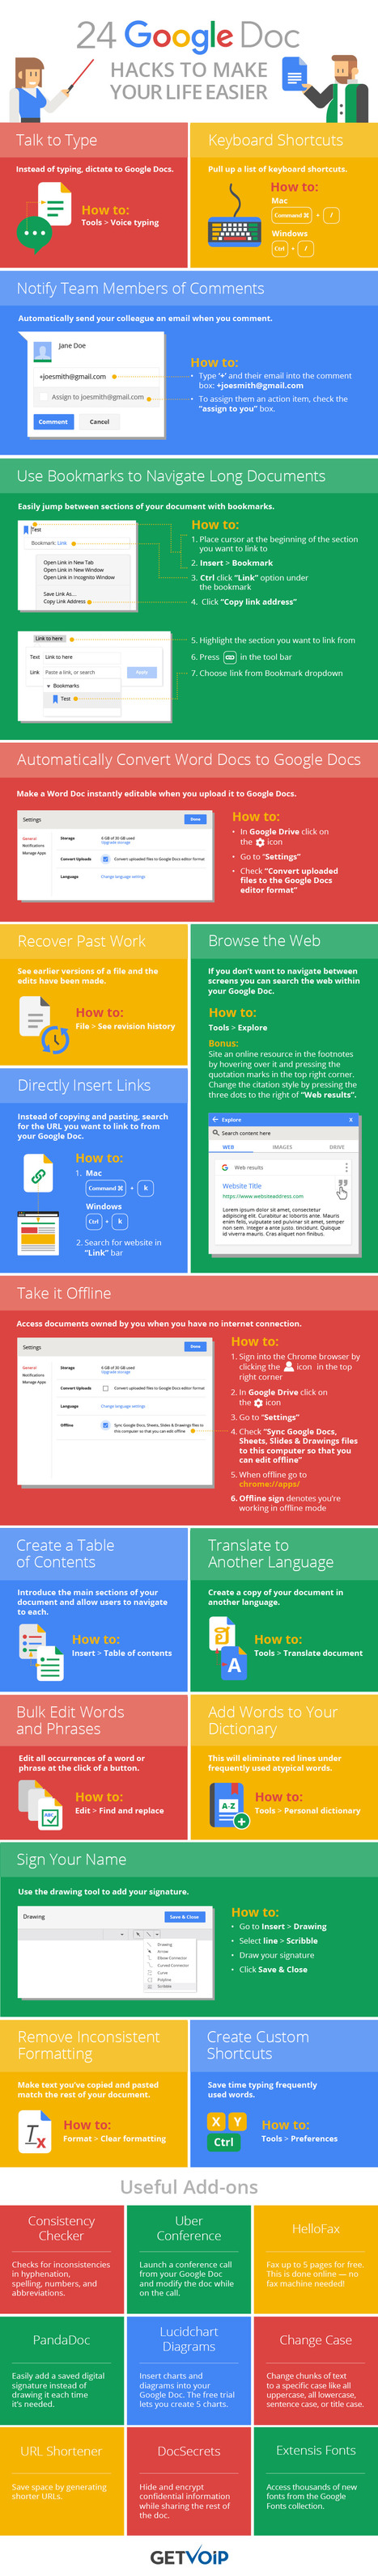 24 Google Doc Hacks to Make Your Life Easier Infographic - e-Learning Infographics | Didactics and Technology in Education | Scoop.it